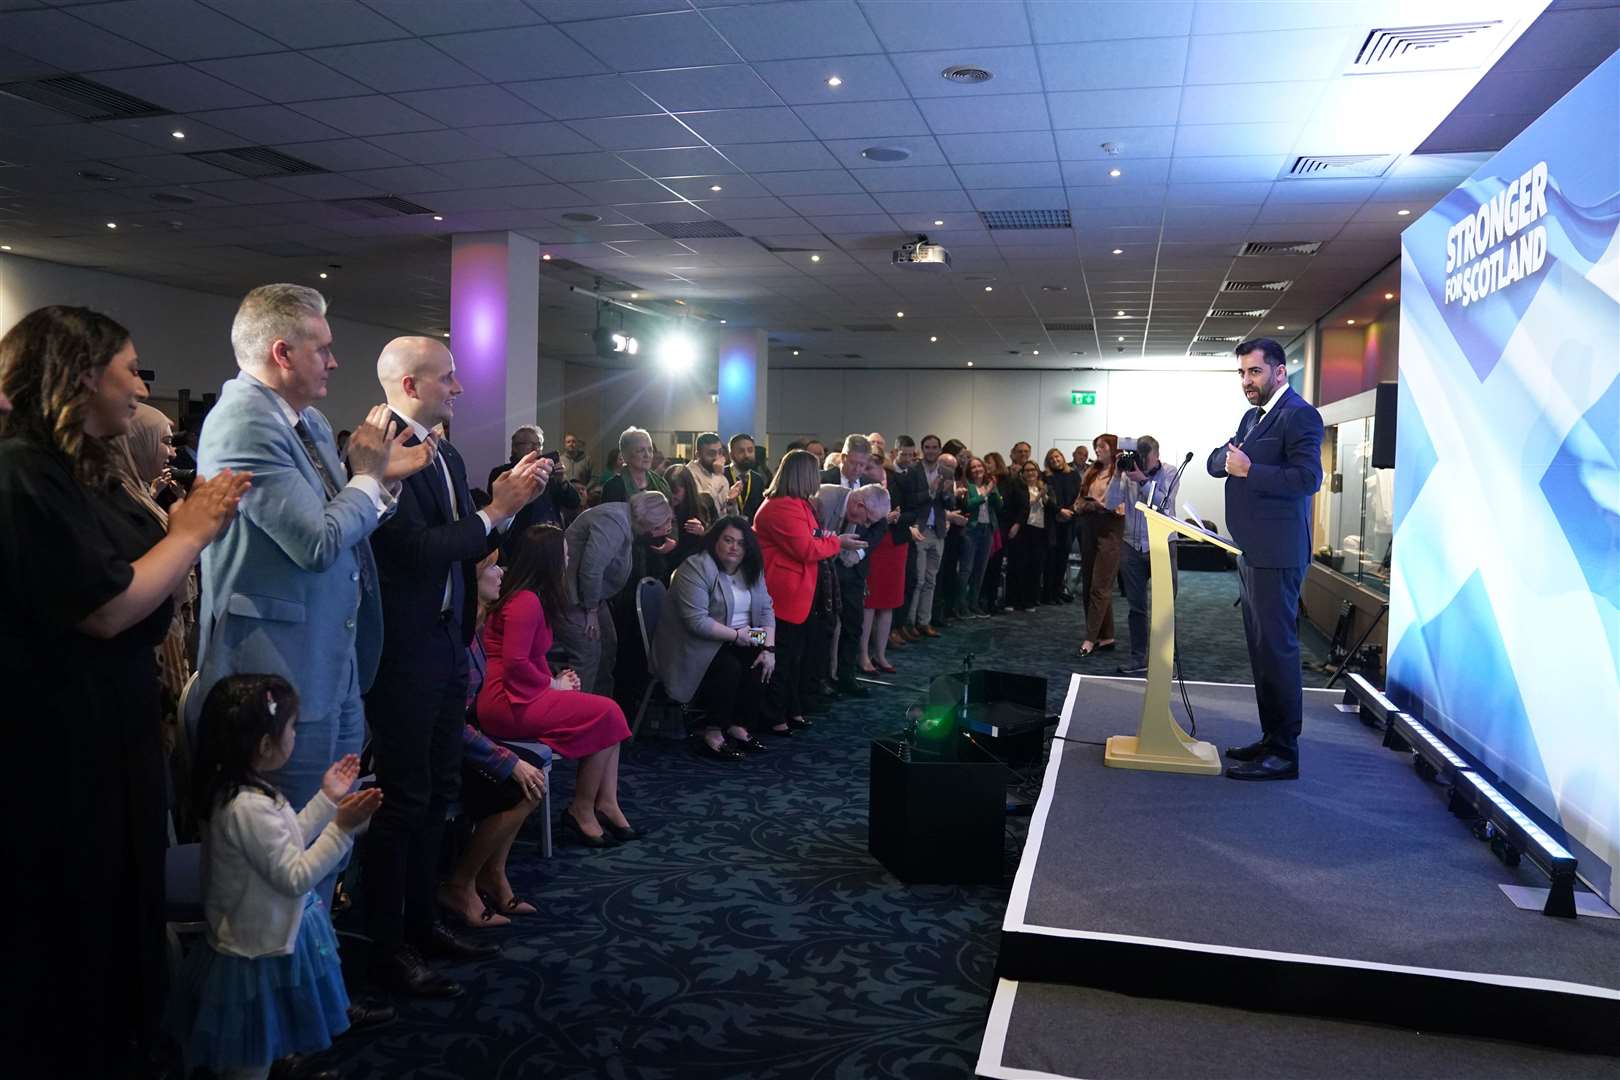 Humza Yousaf gibes a victory speech after being elected SNP leader (Andrew Milligan/PA)